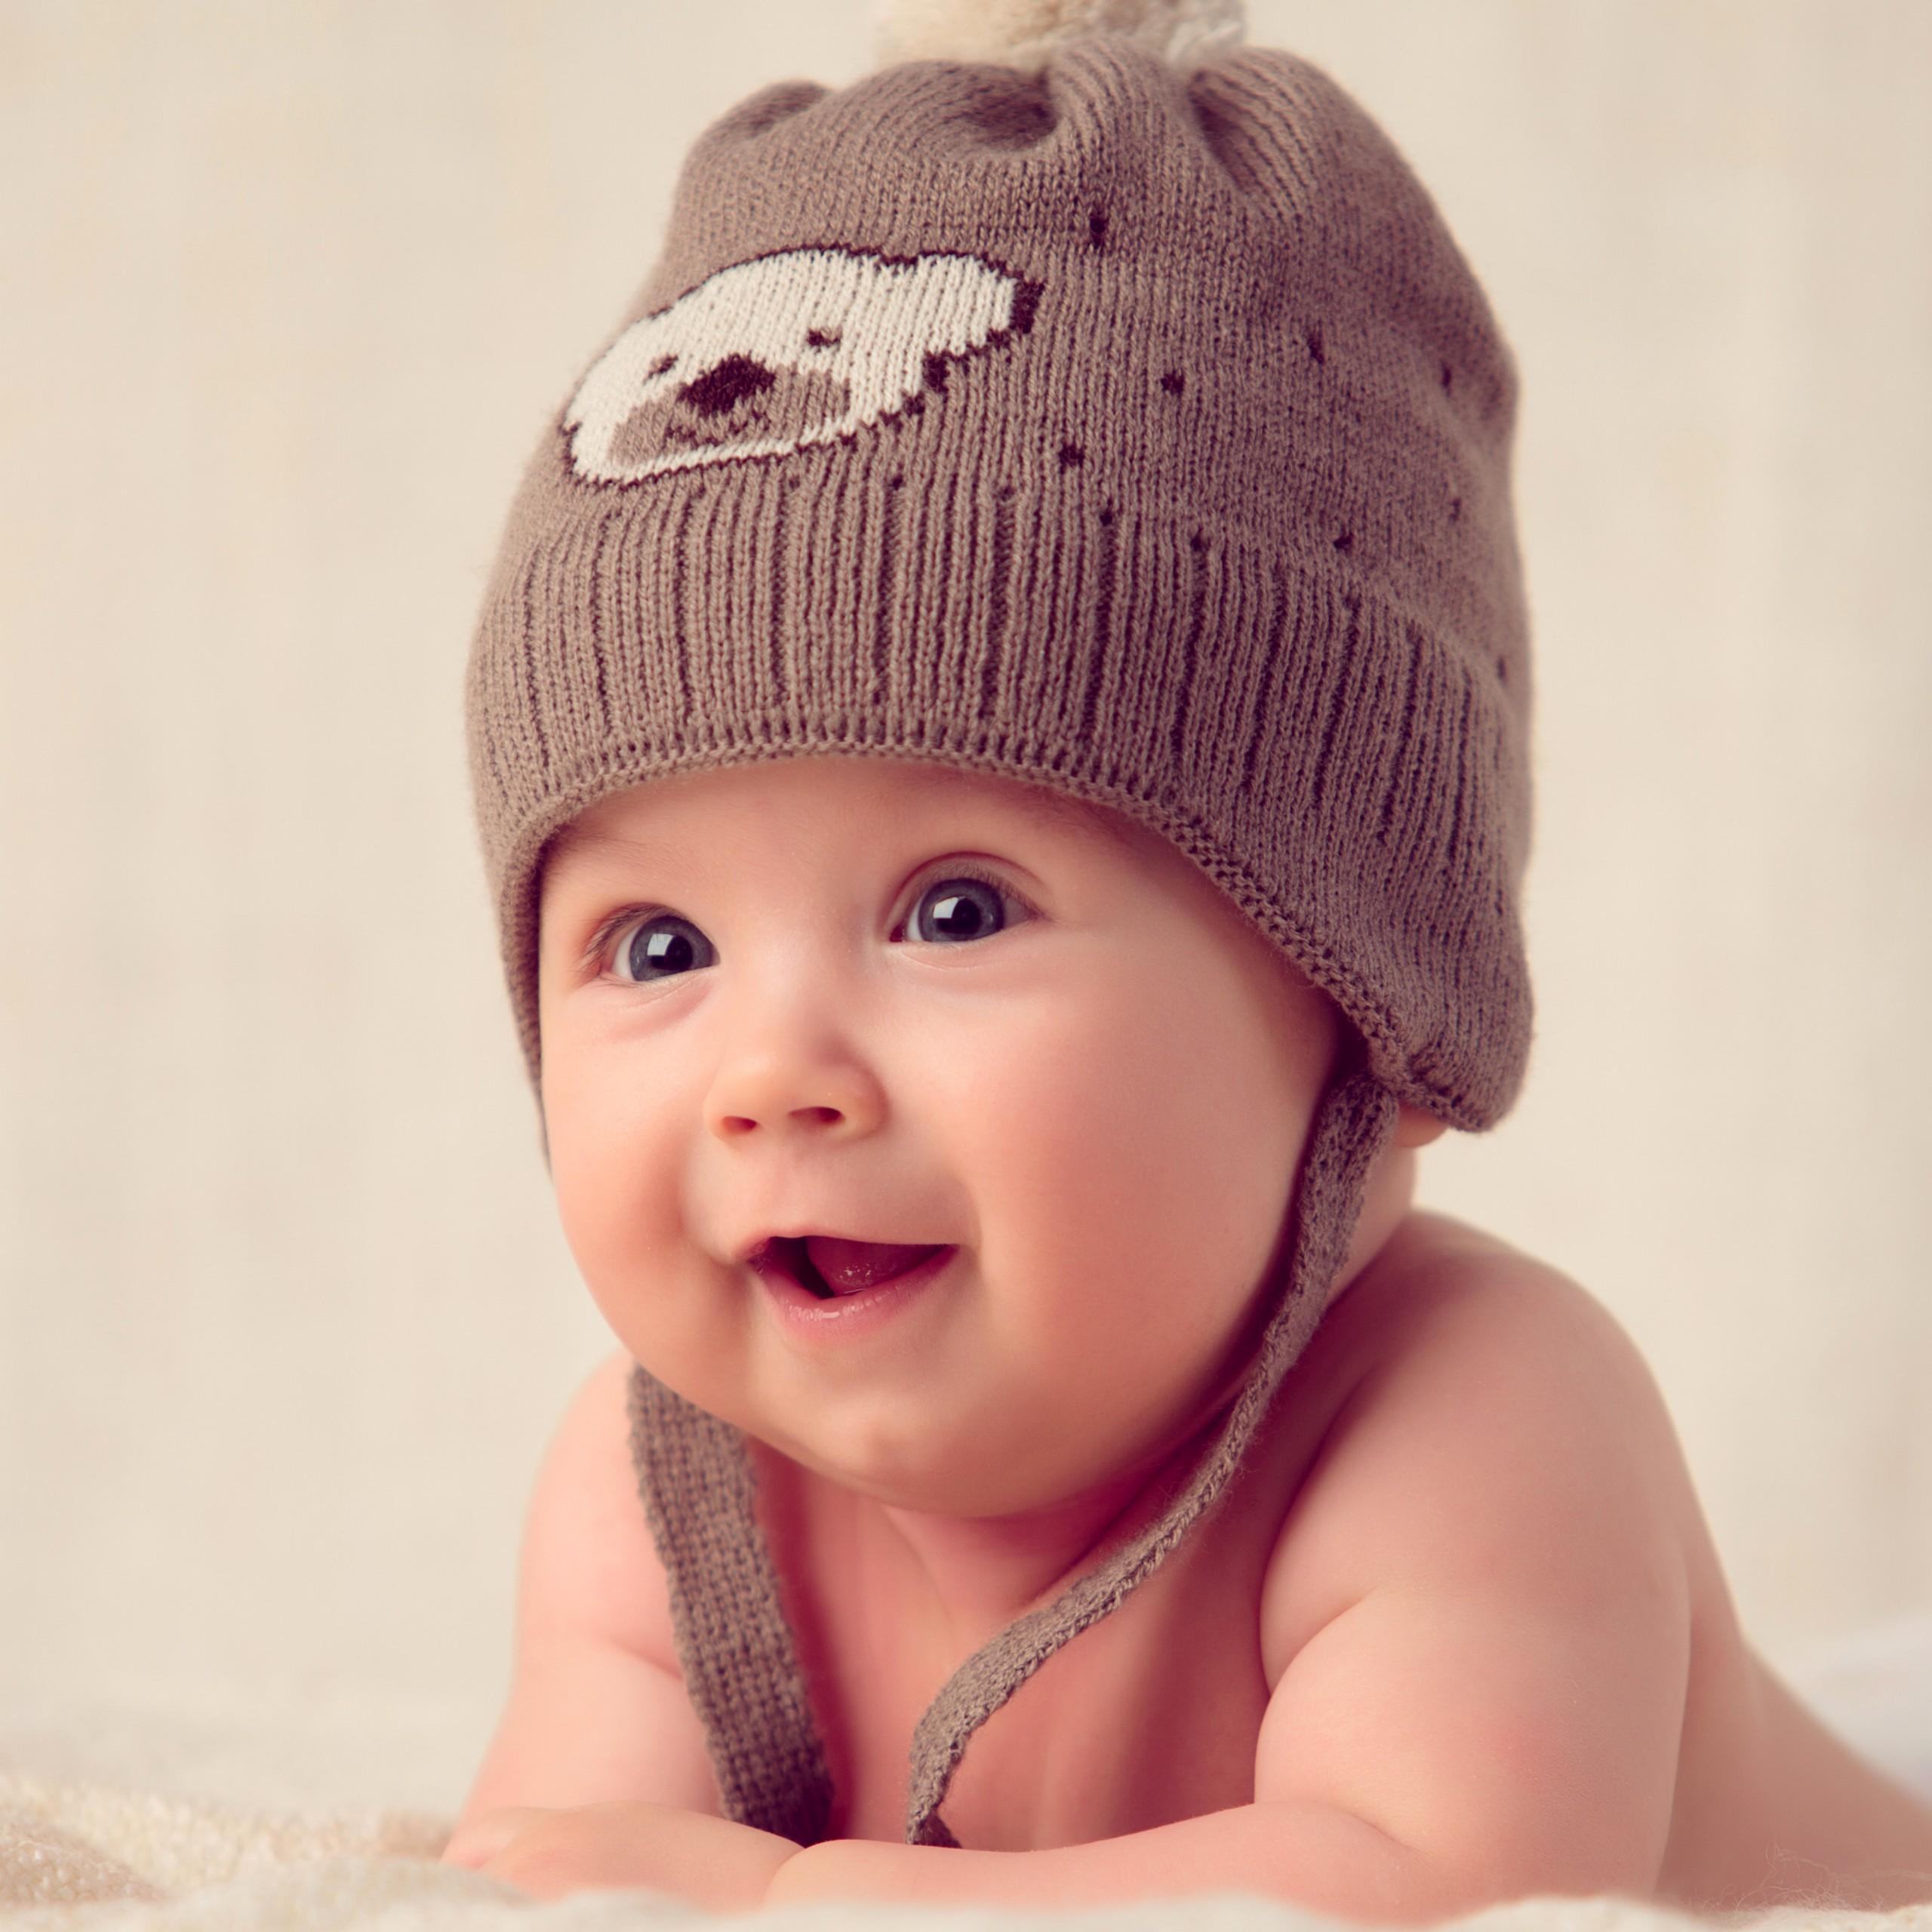 Cute Baby Mobile Wallpapers - Top Free Cute Baby Mobile Backgrounds -  WallpaperAccess